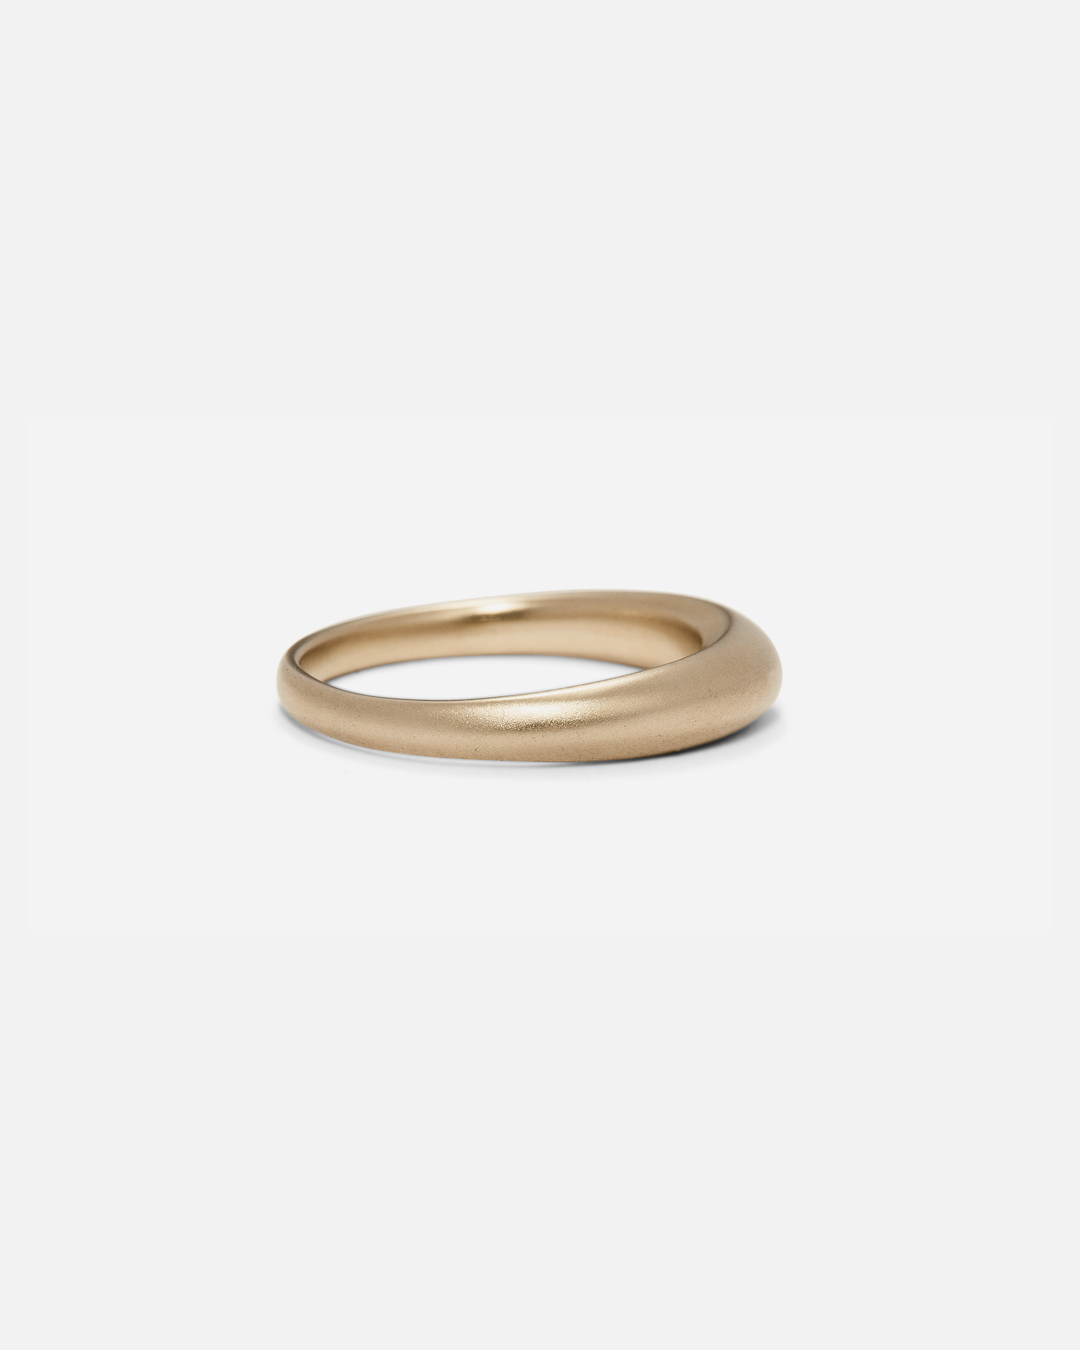 Moon Band / Small By Hiroyo in Wedding Bands Category